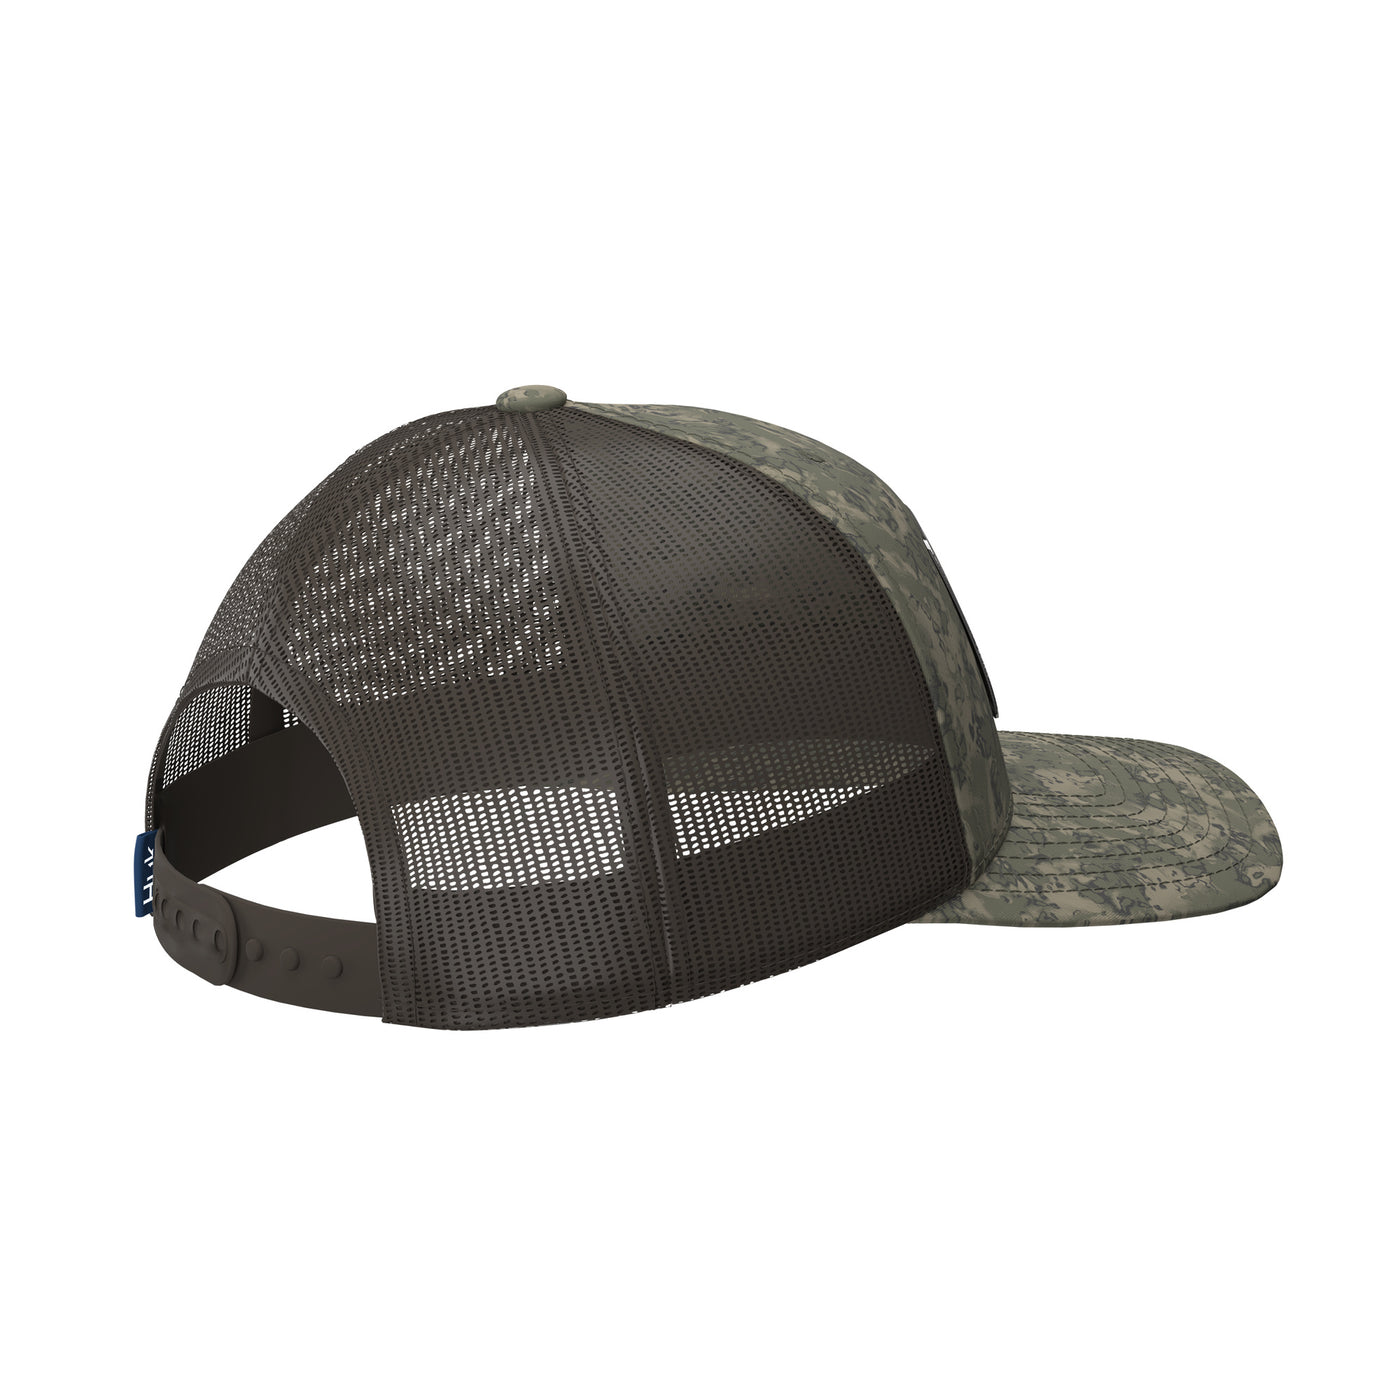 Kango Customized Flex Fit Camo Trucker Hat Camouflage Hiking and